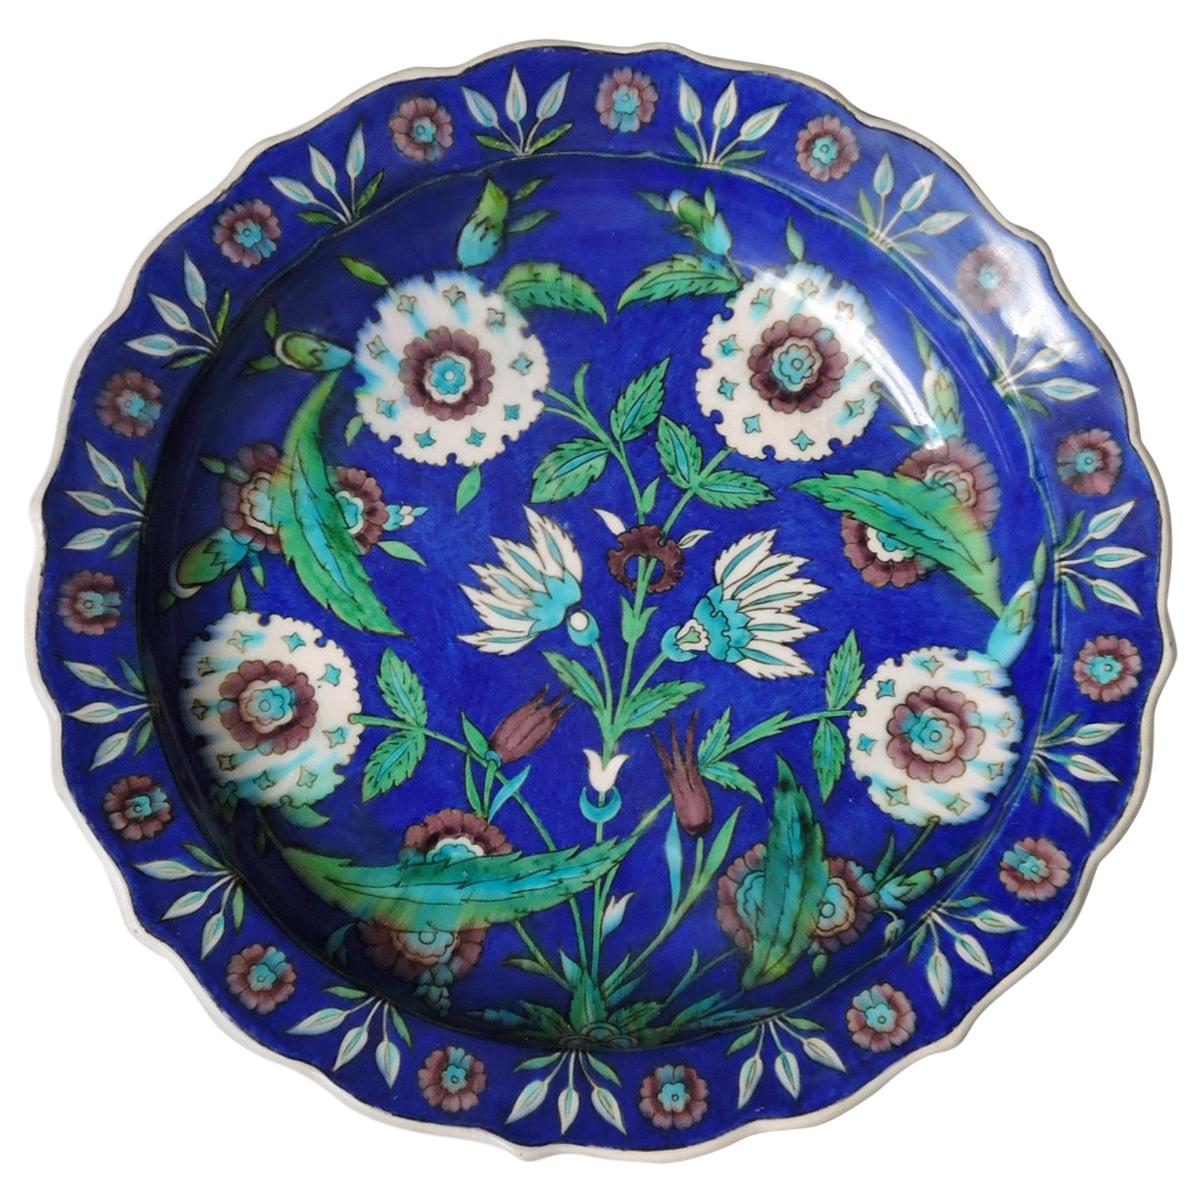 Théodore Deck, a Fretted Enameled Faience Impressive Iznik Charger